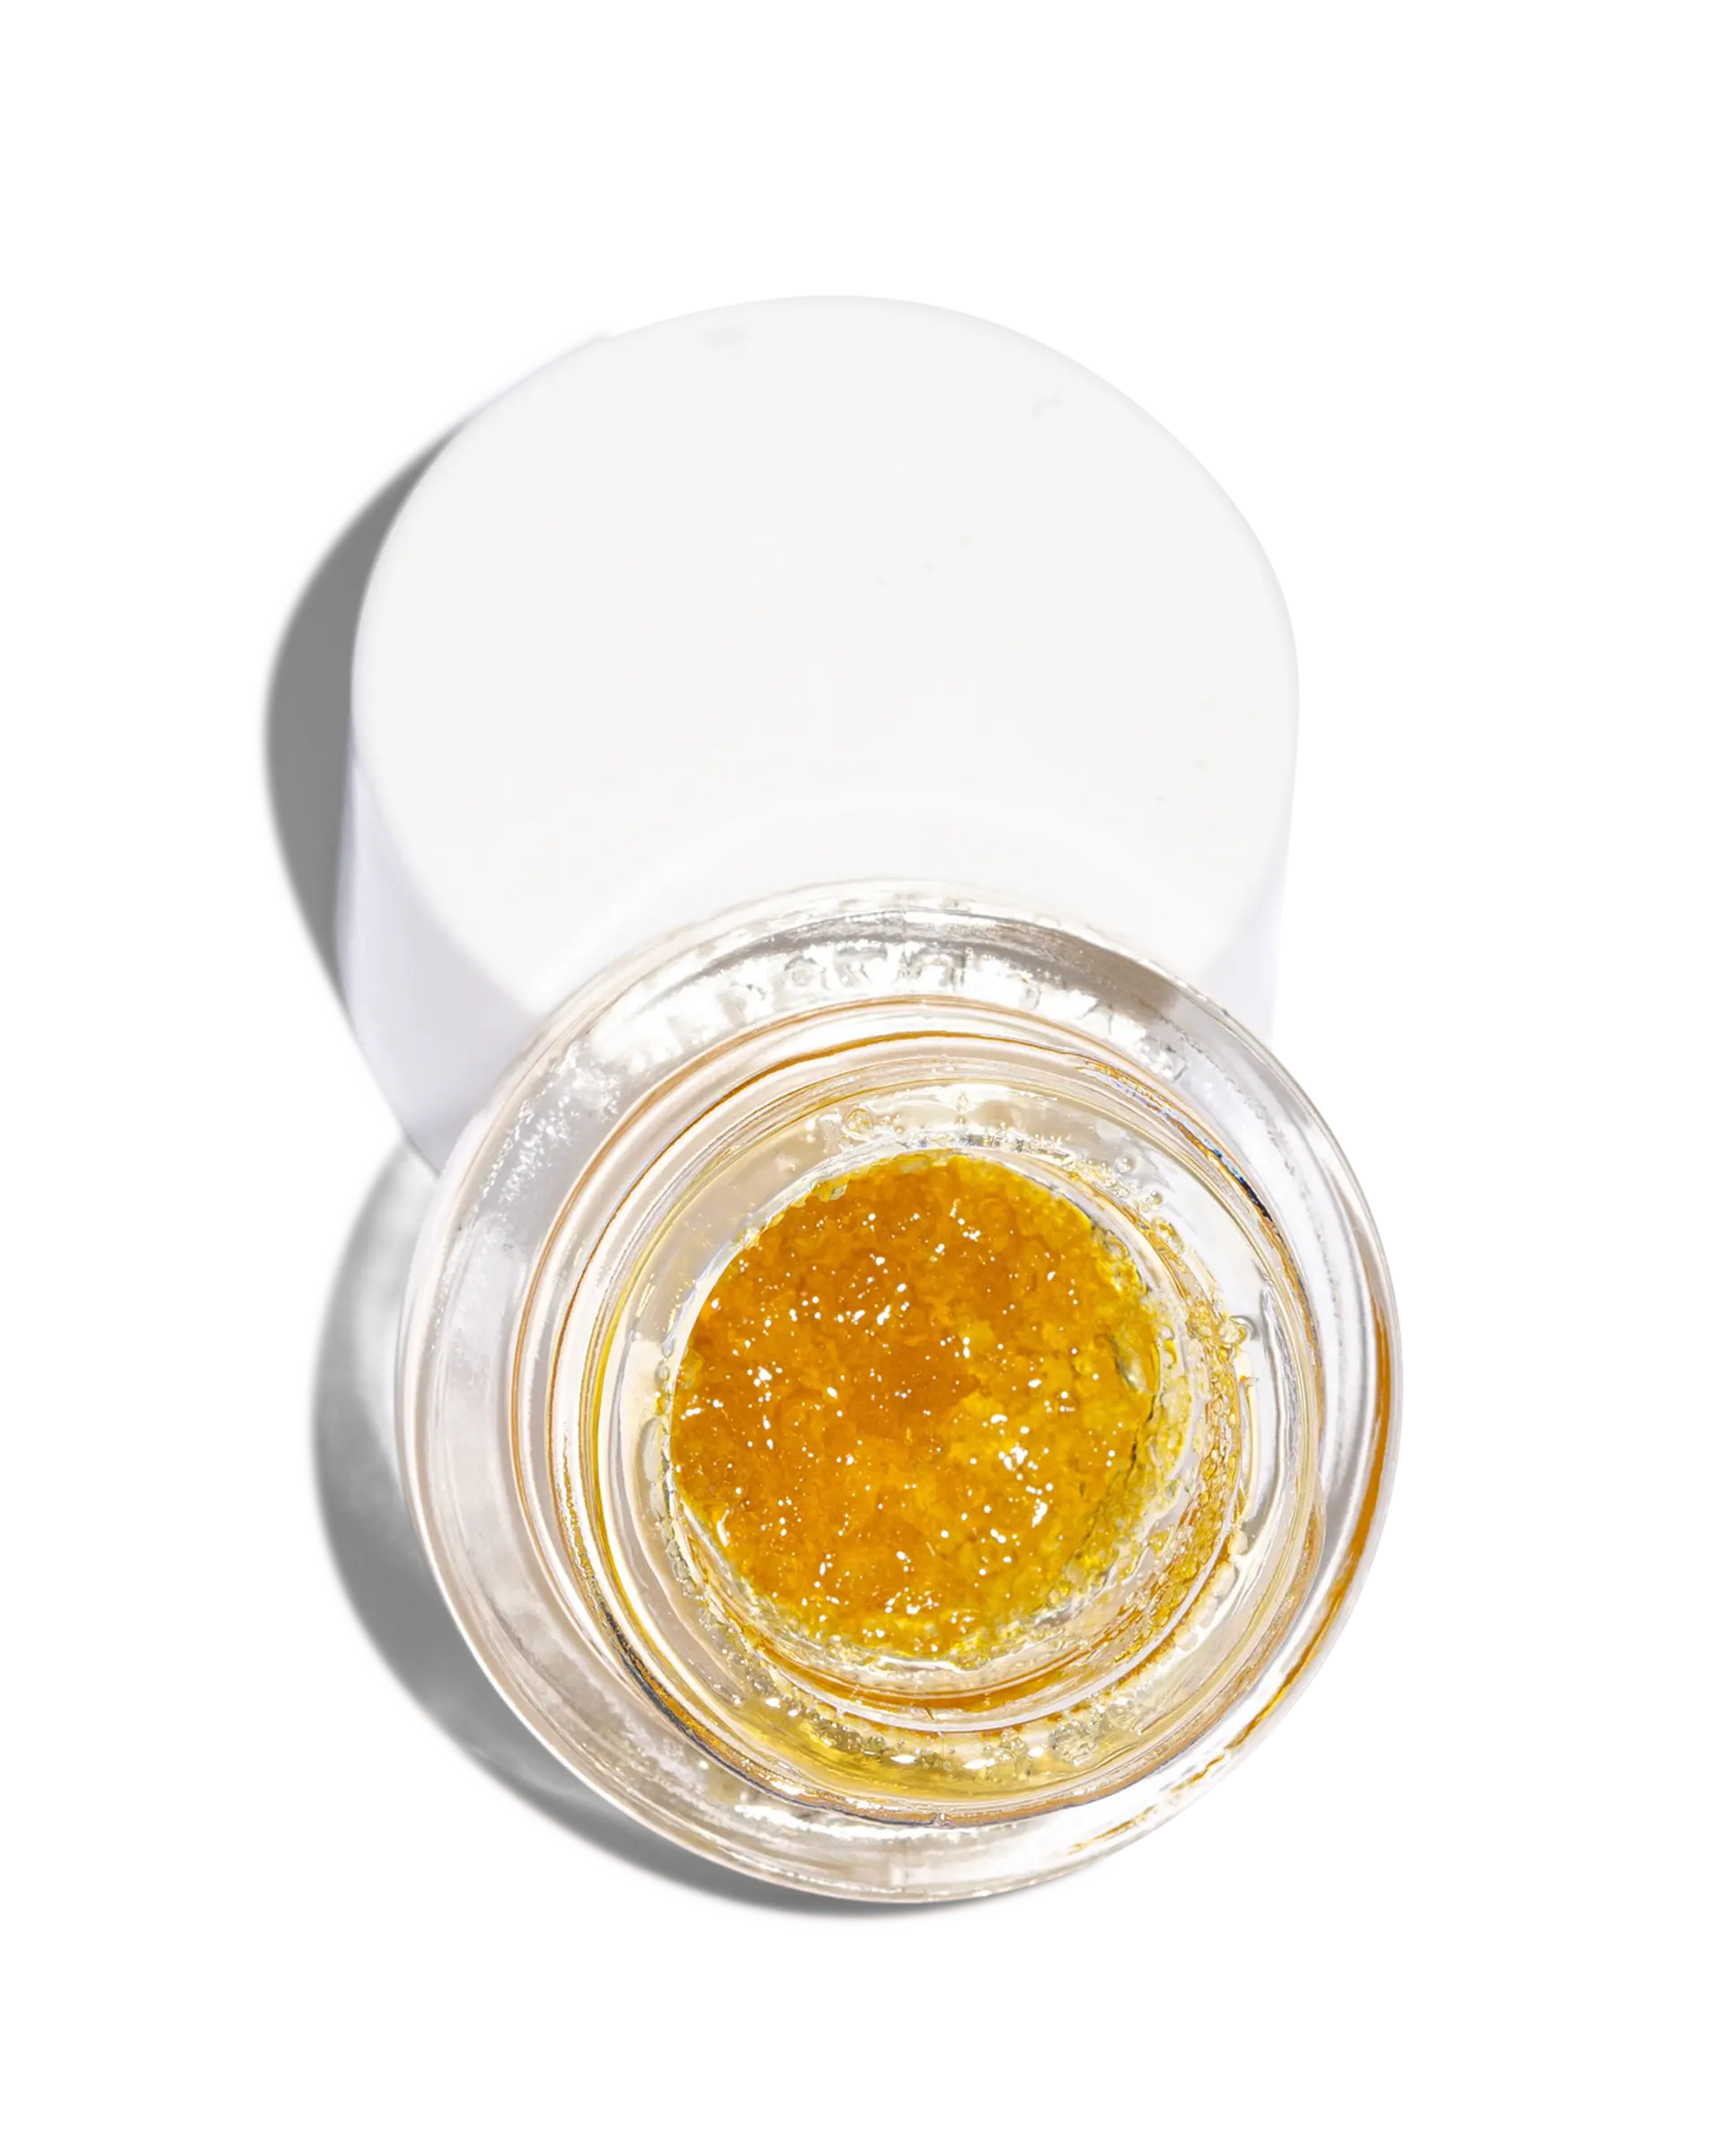 Ecto Cooler Live Resin 1g